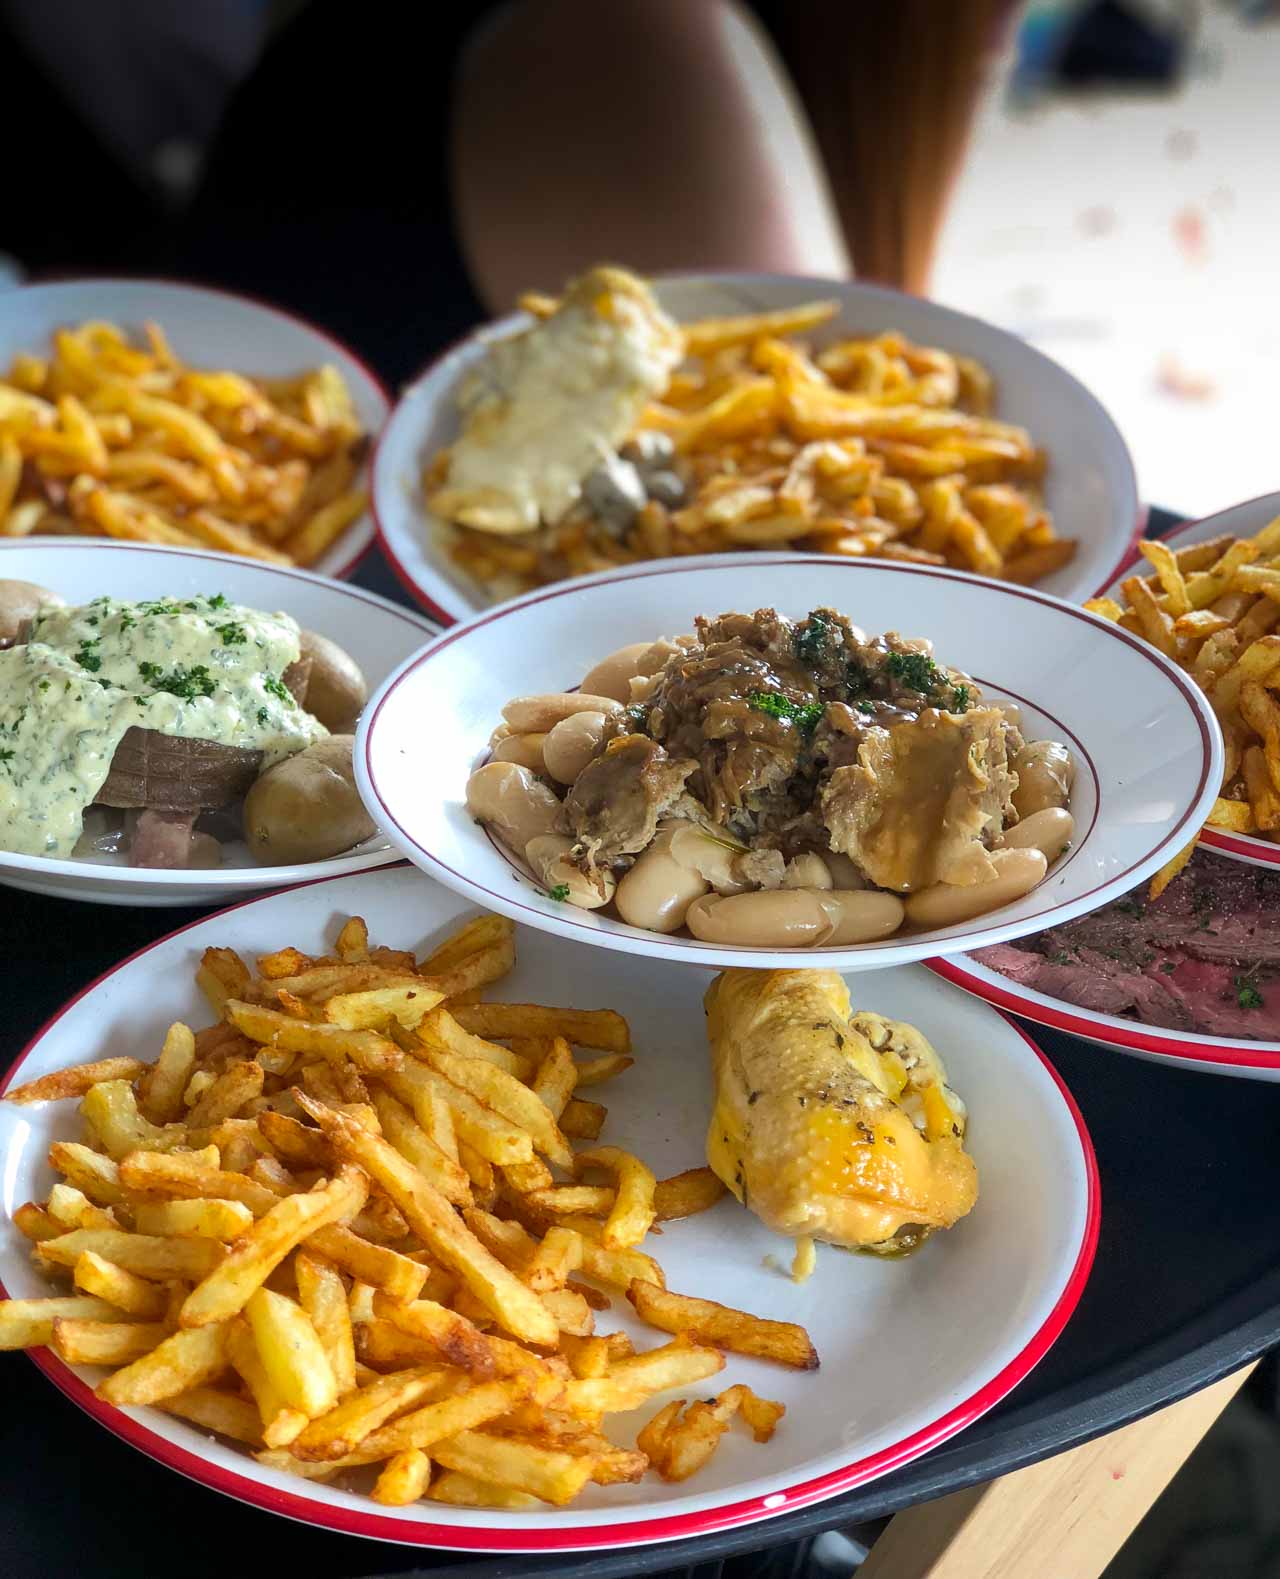 A bustling bistro in Paris that serves fresh, housemade food at astonishing prices.